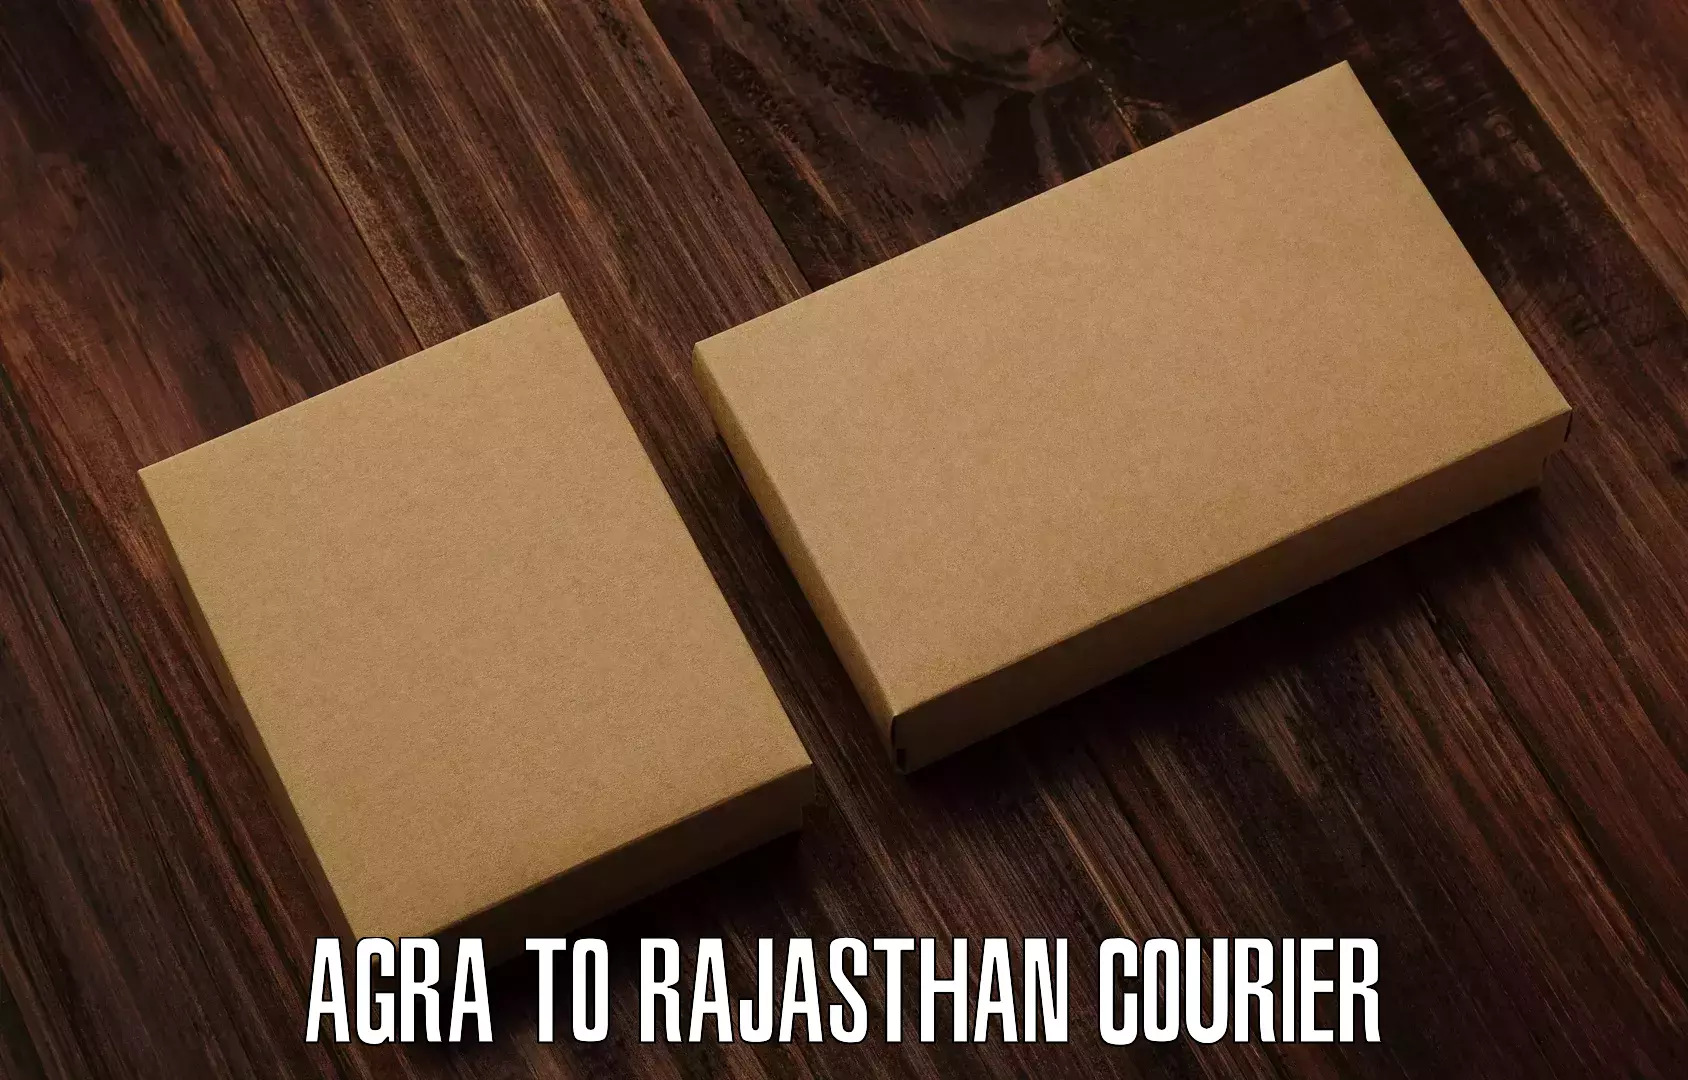 Automated parcel services Agra to Dhariyawad